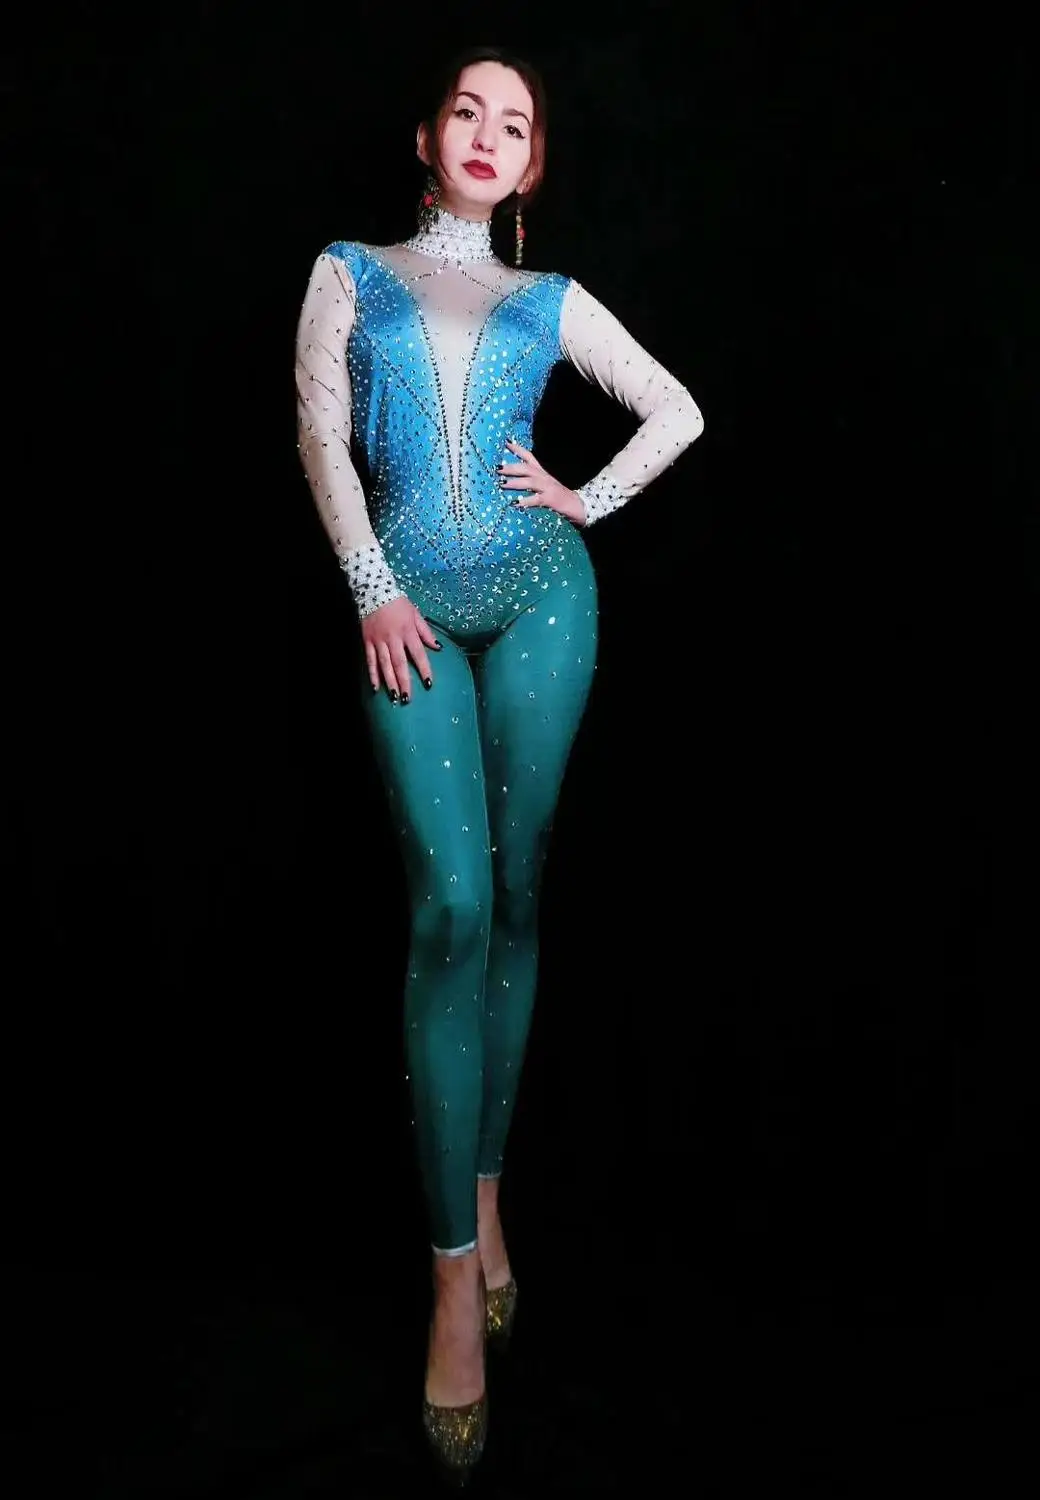 Silver Rhinestones Backless Jumpsuit Birthday Celebrate Rave Outfit Nude Blue Bodysuit Evening Women Singer Dance Outfit